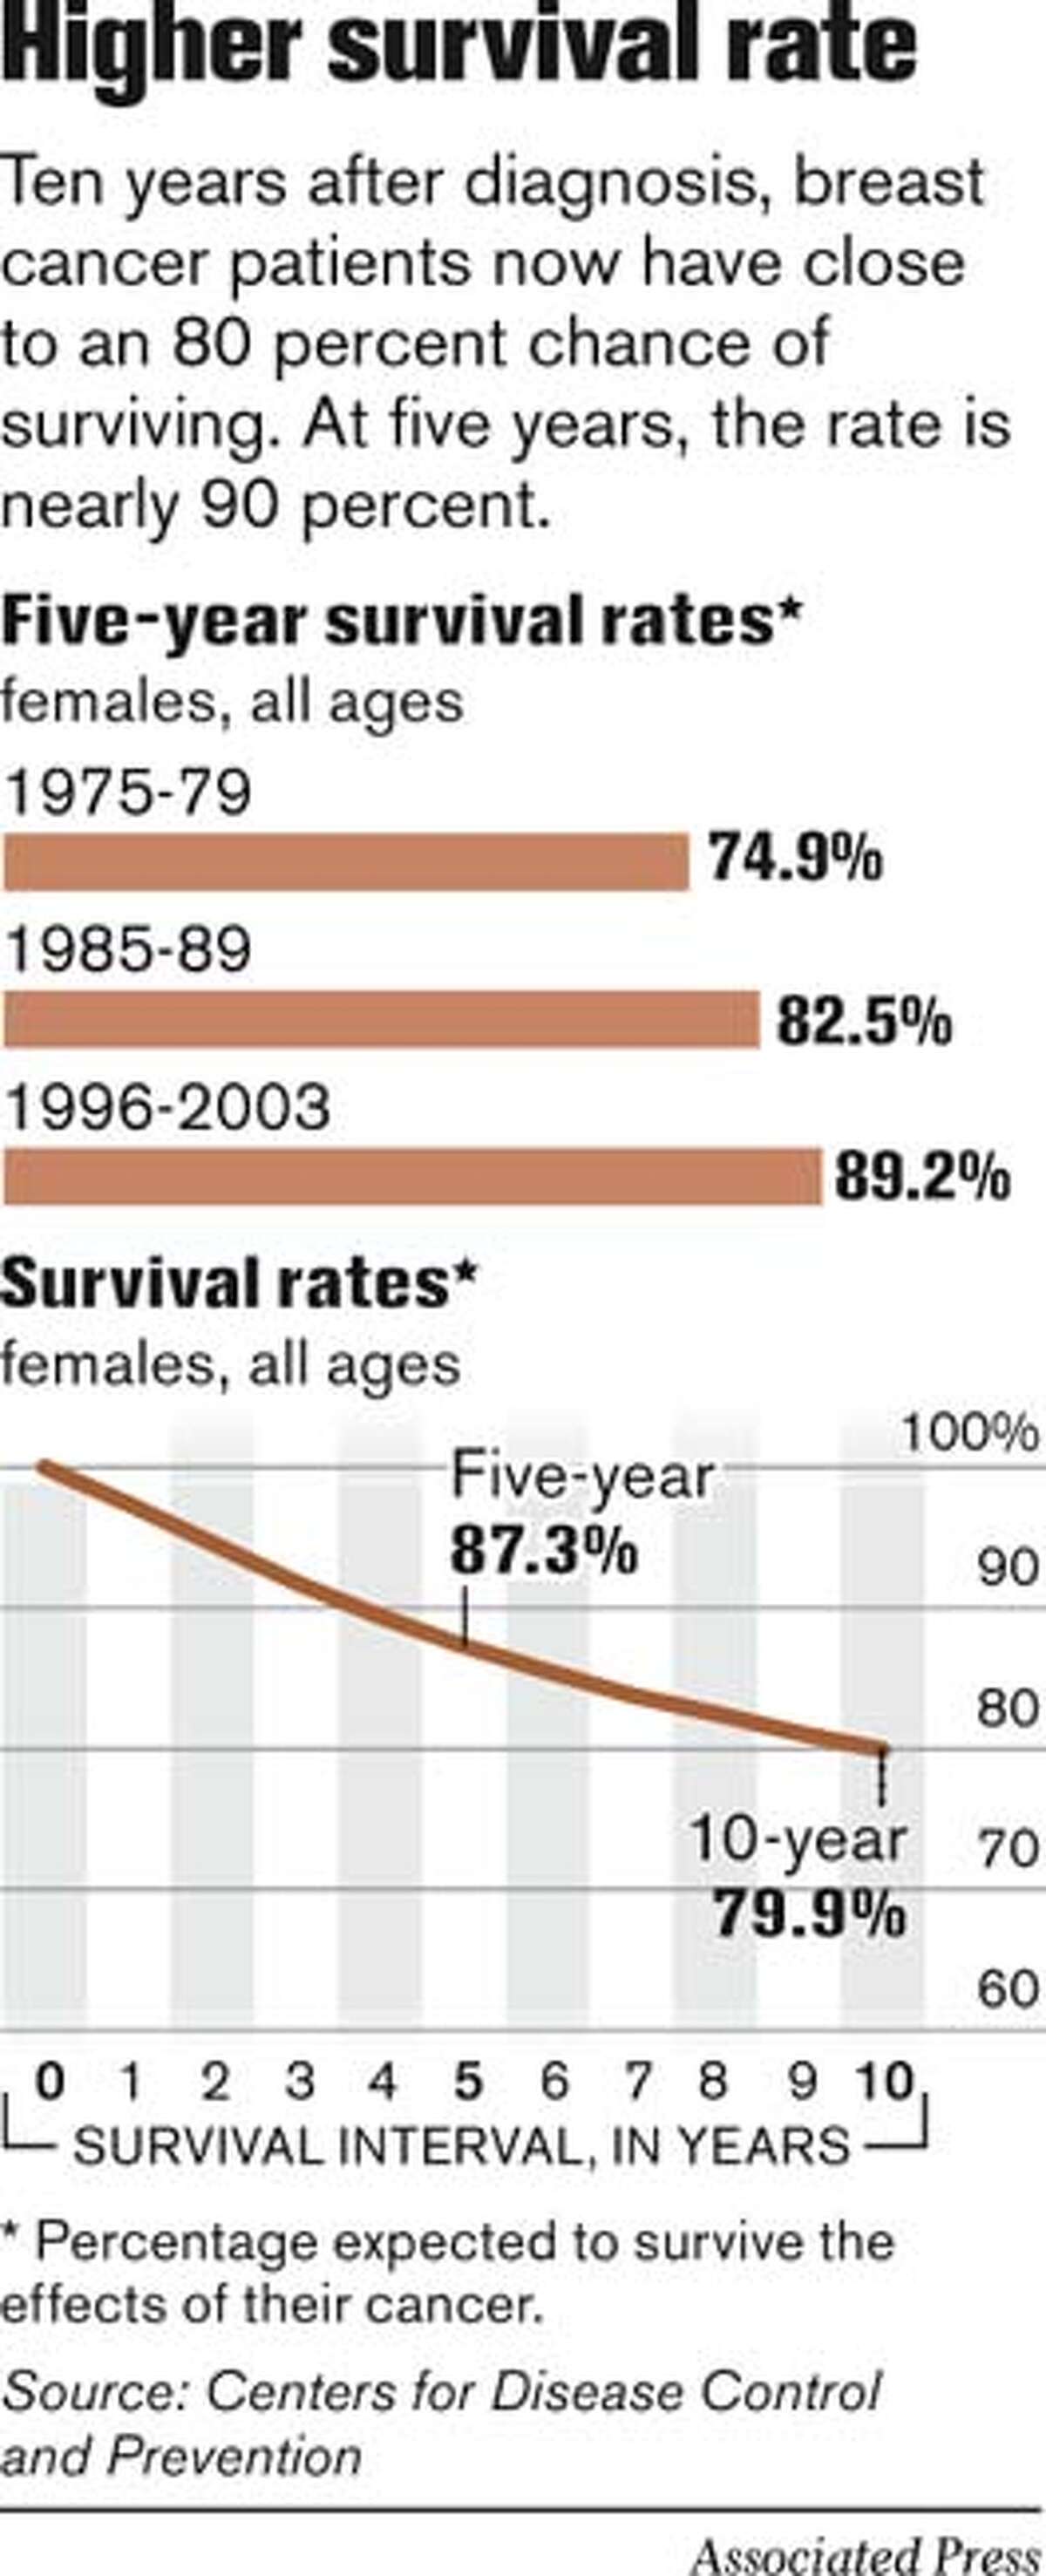 Higher Survival Rate. Associated Press Graphic